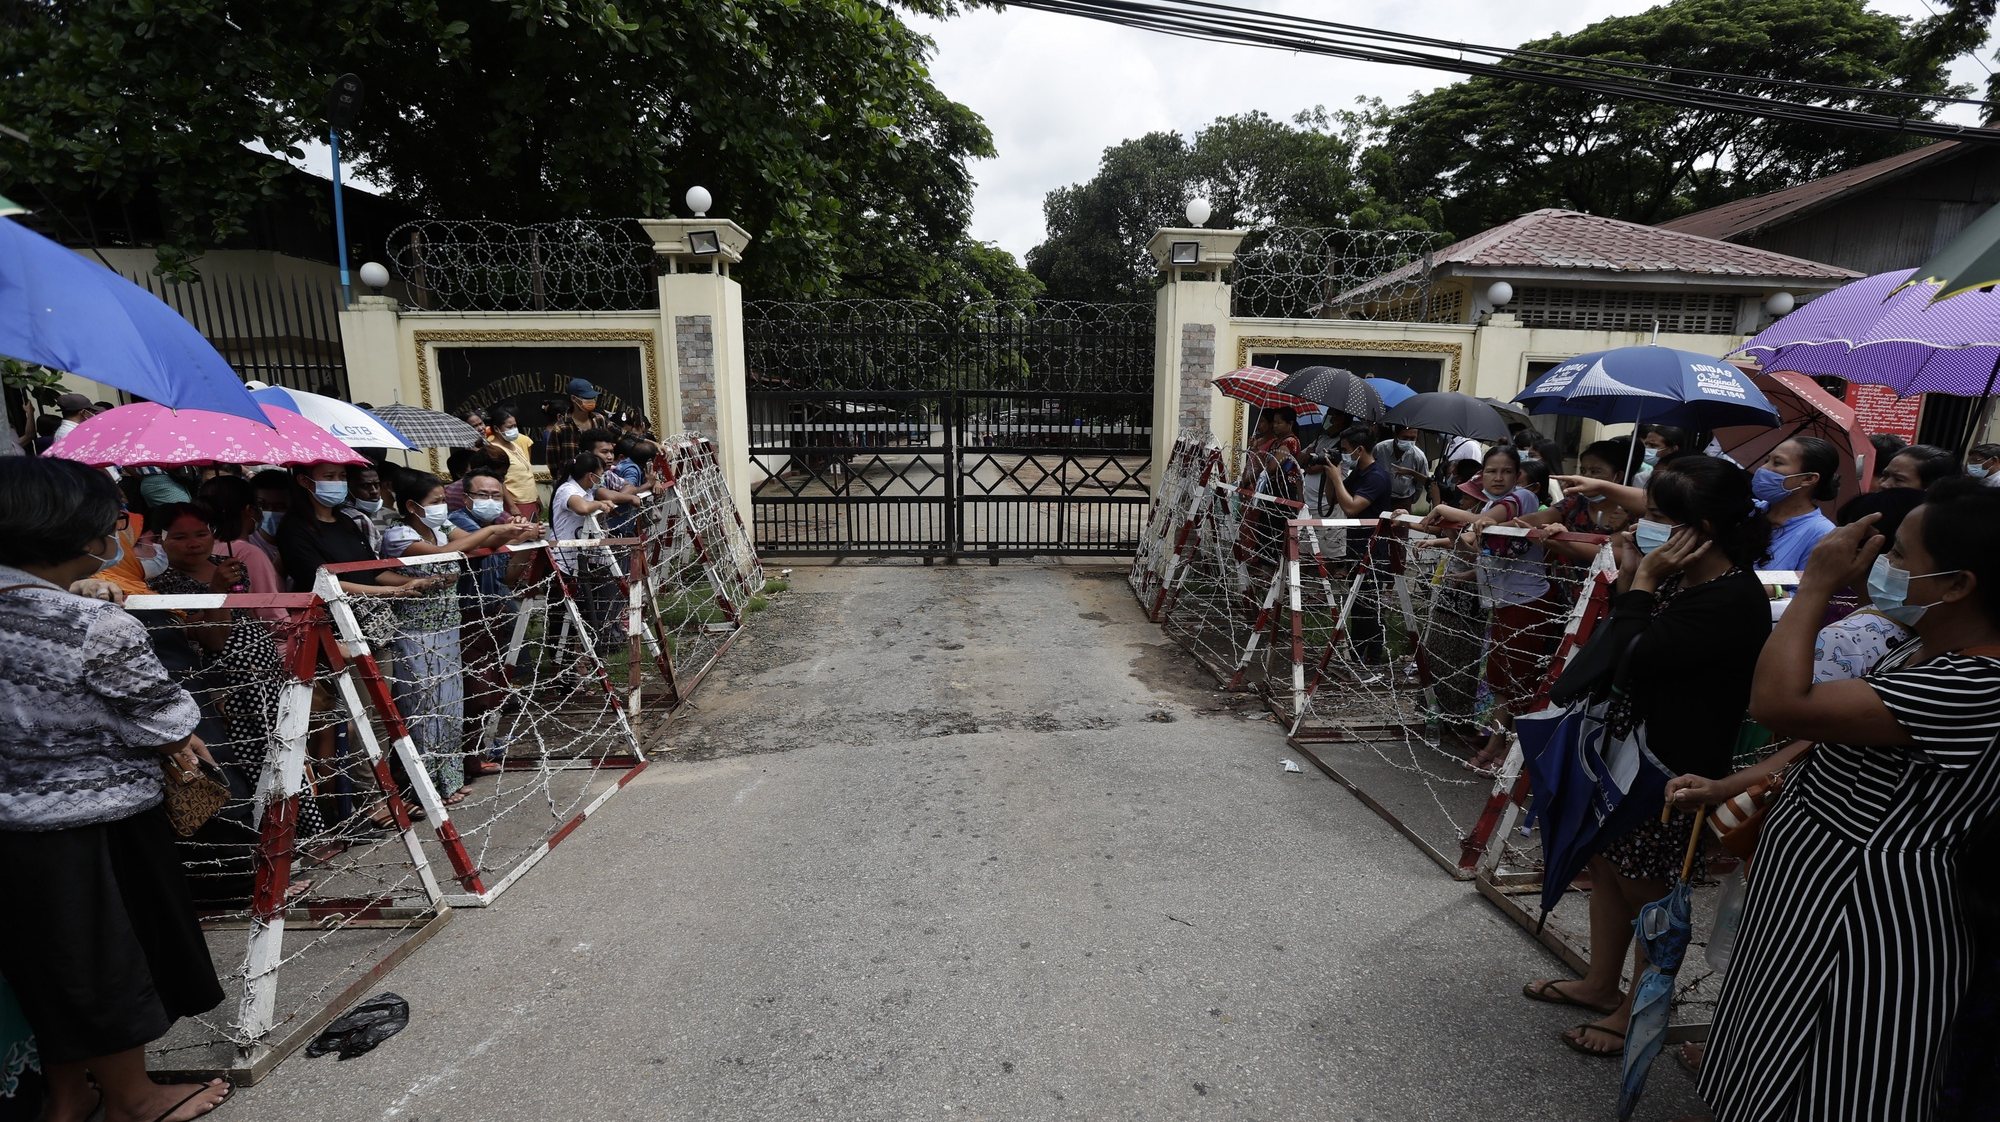 epa09312589 People wait behind barricades for their relatives to be released outside the main entrance of Insein prison compound in Yangon, Myanmar, 30 June 2021. The prison authority confirmed the upcoming release of about 700 prisoners from Yangon&#039;s Insein jail, including some who were jailed for opposing the military. According to the Assistance Association for Political Prisoners (Burma) - AAPPB, as of June 2021 a total of 5,224 people who are against the February 2021 coup are being held in detention centers across Myanmar.  EPA/STR